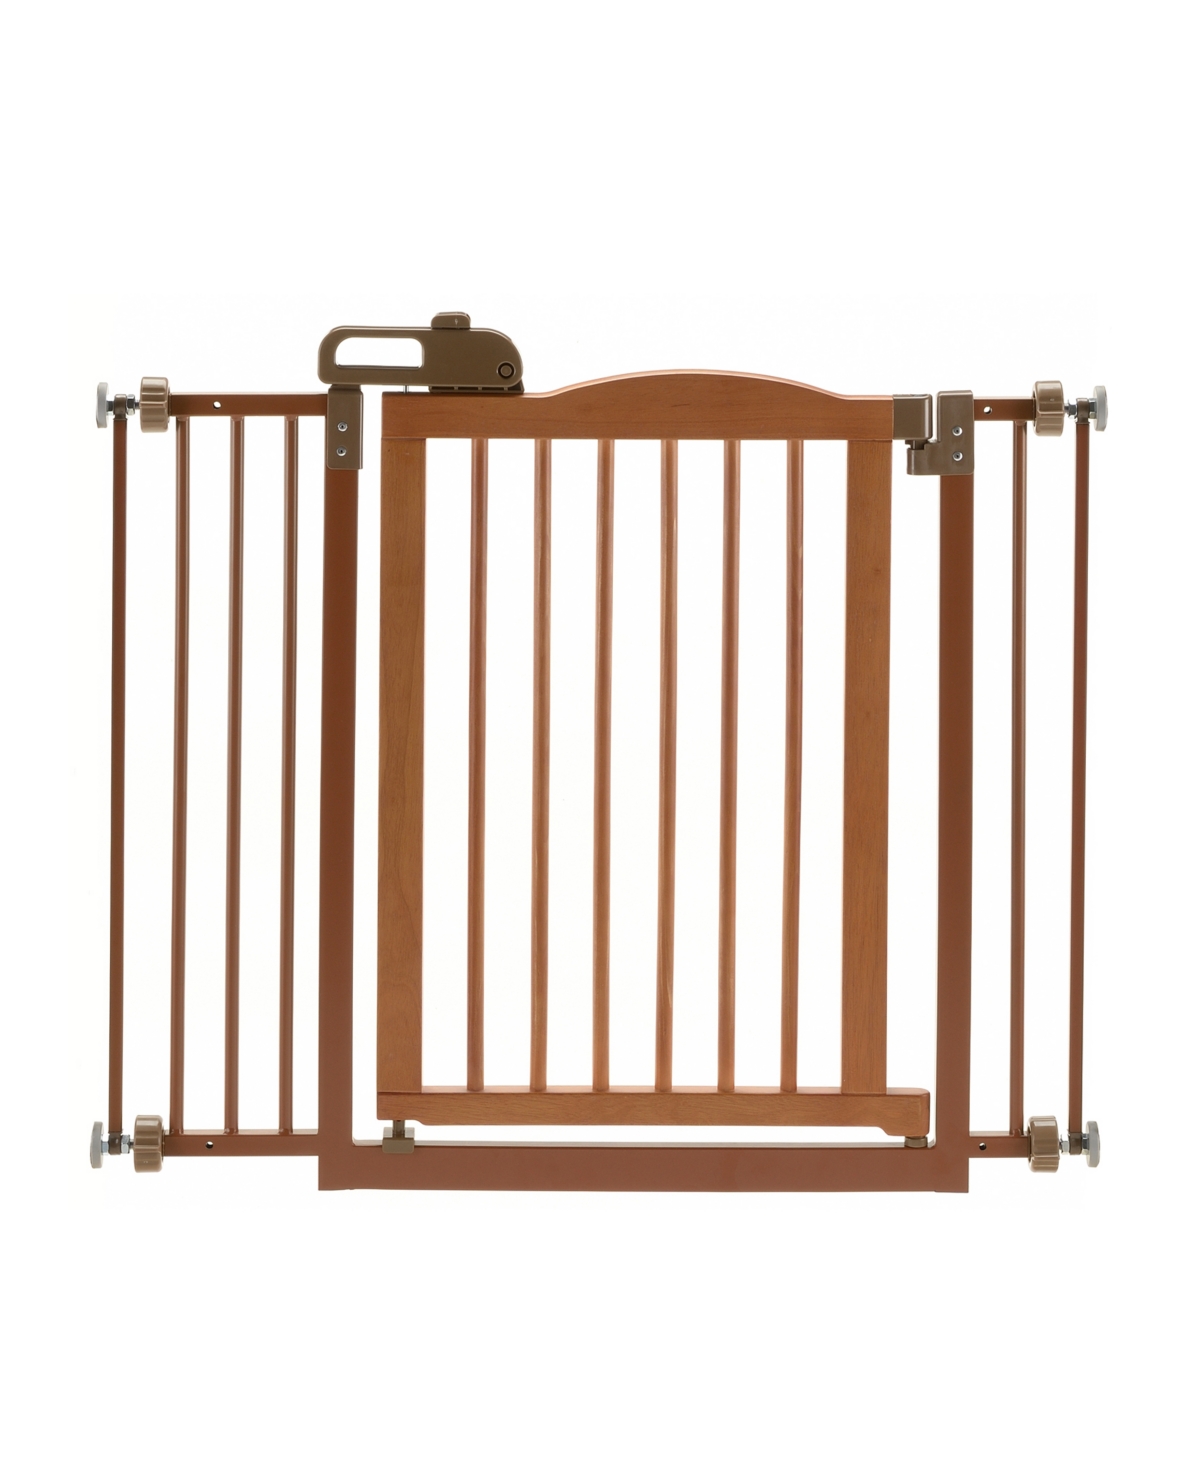 One-Touch Gate Ii - Brown